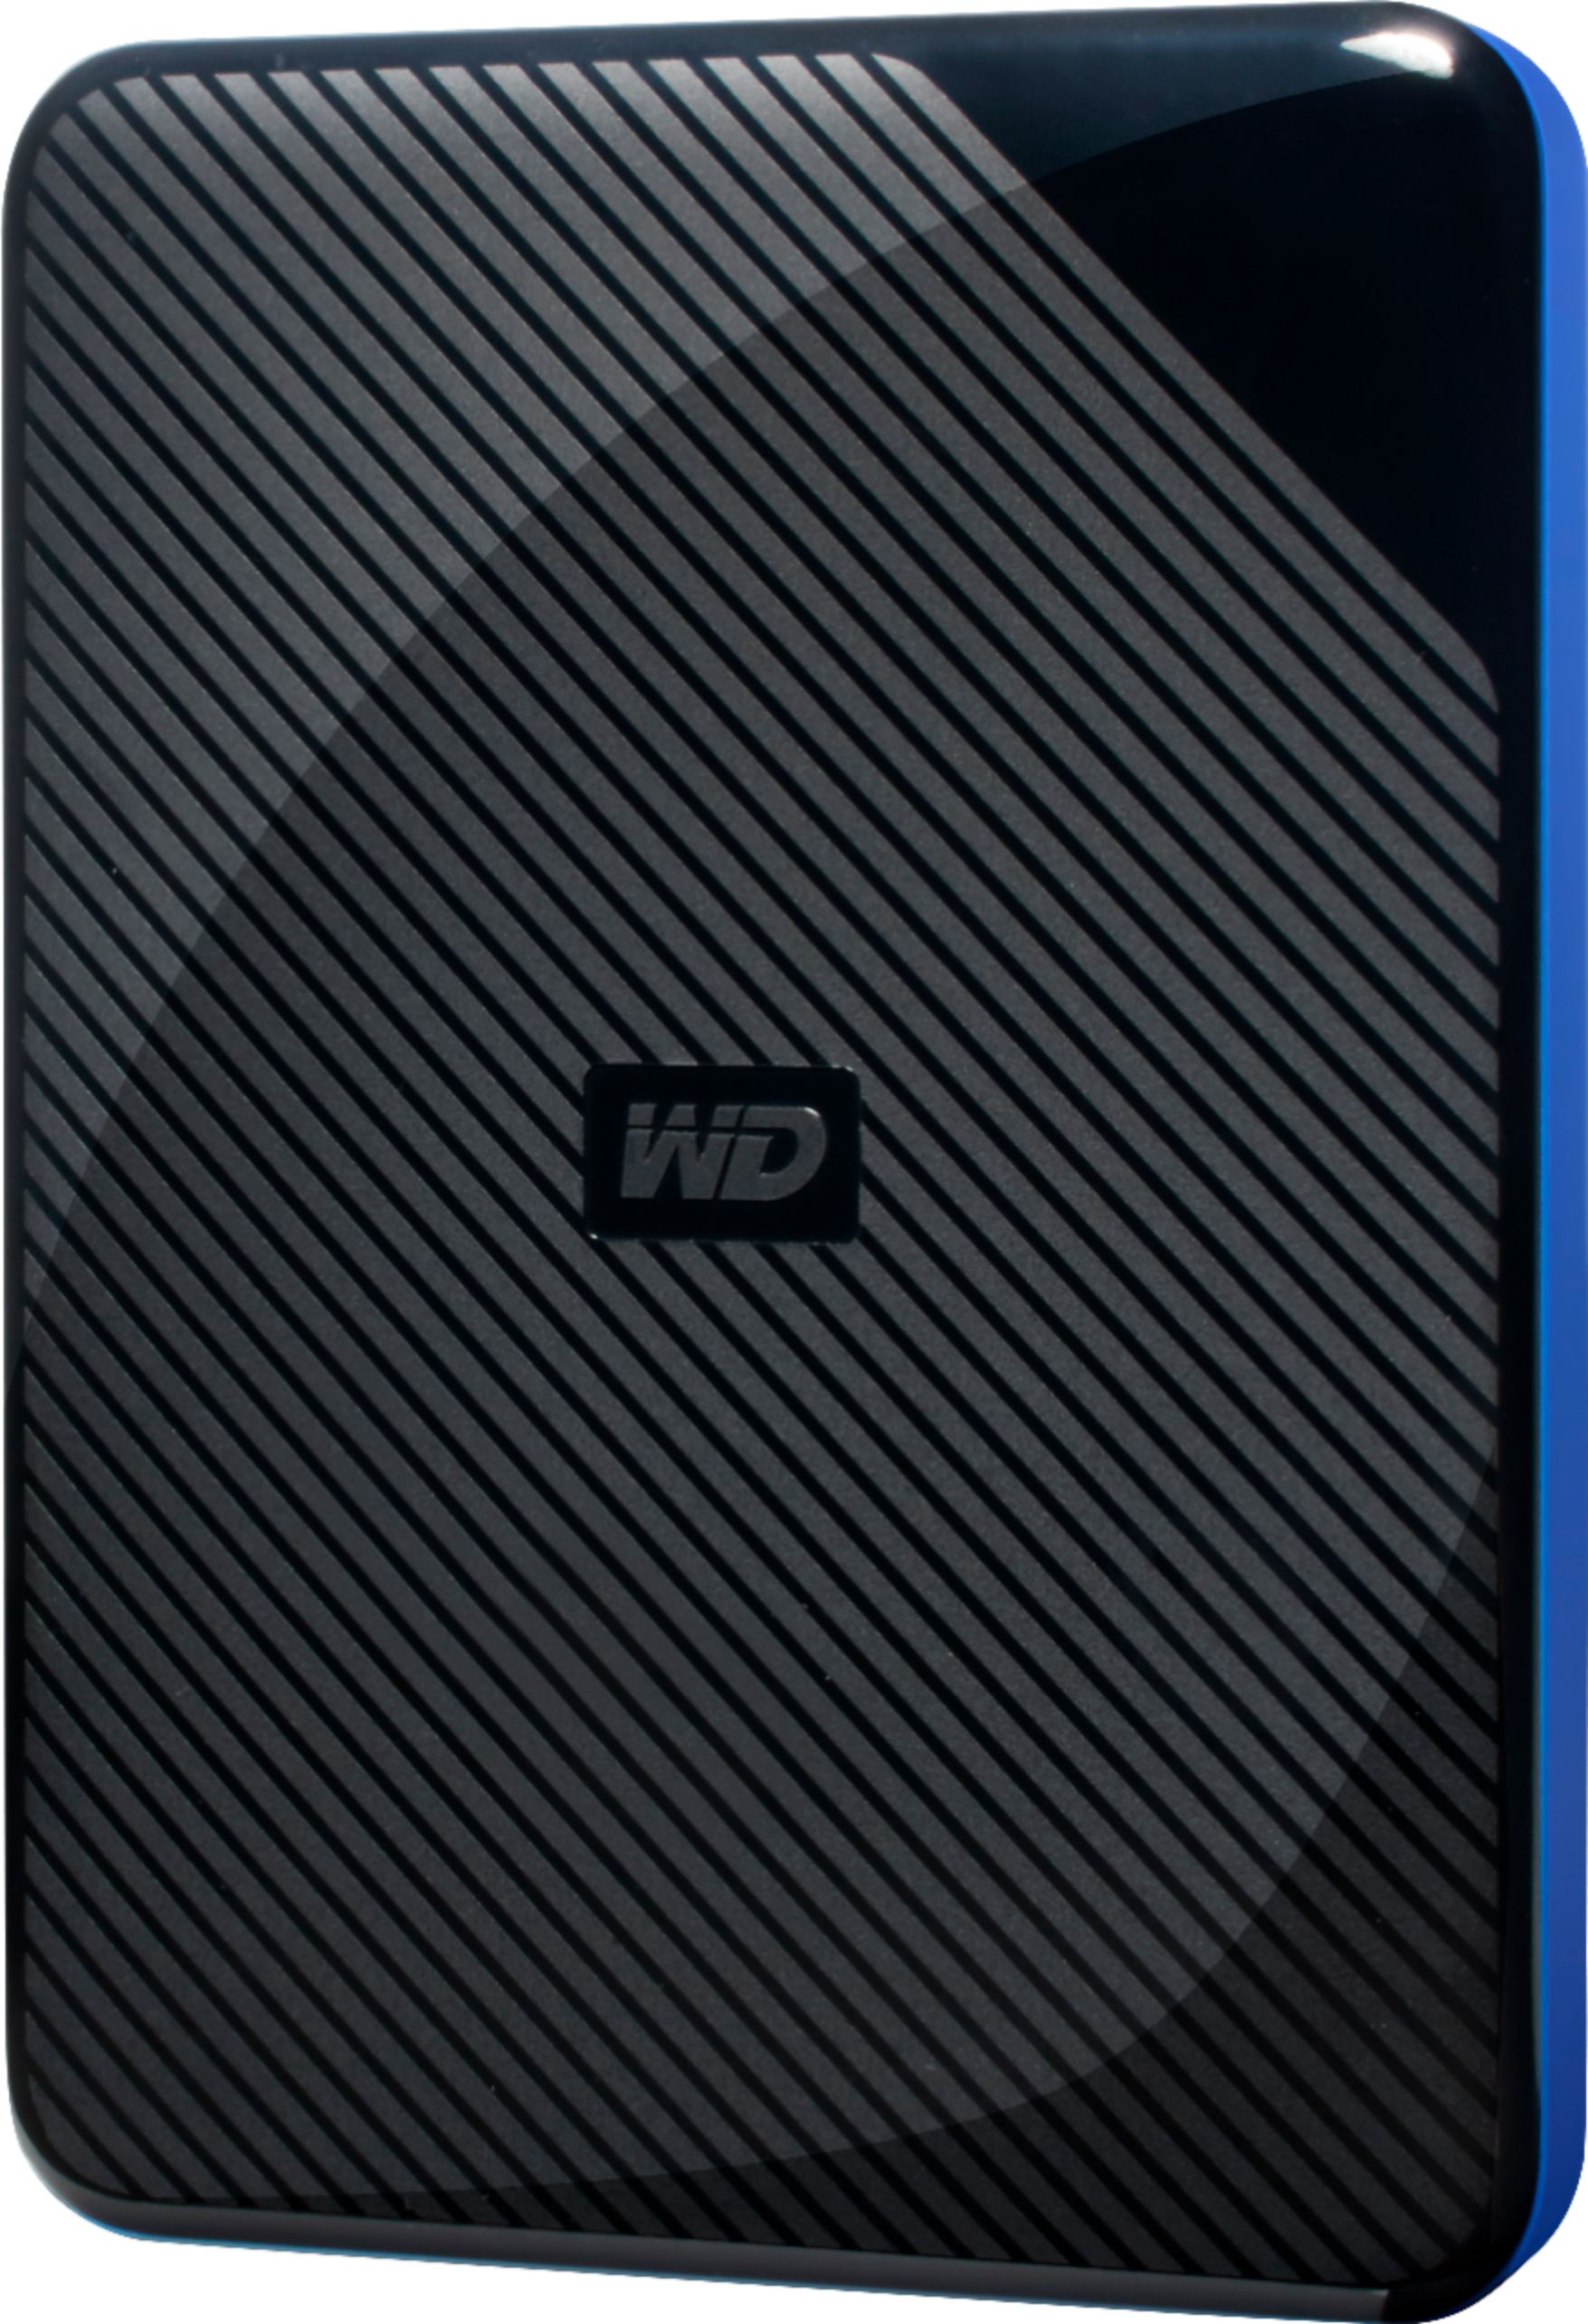 best 2tb hdd for ps4